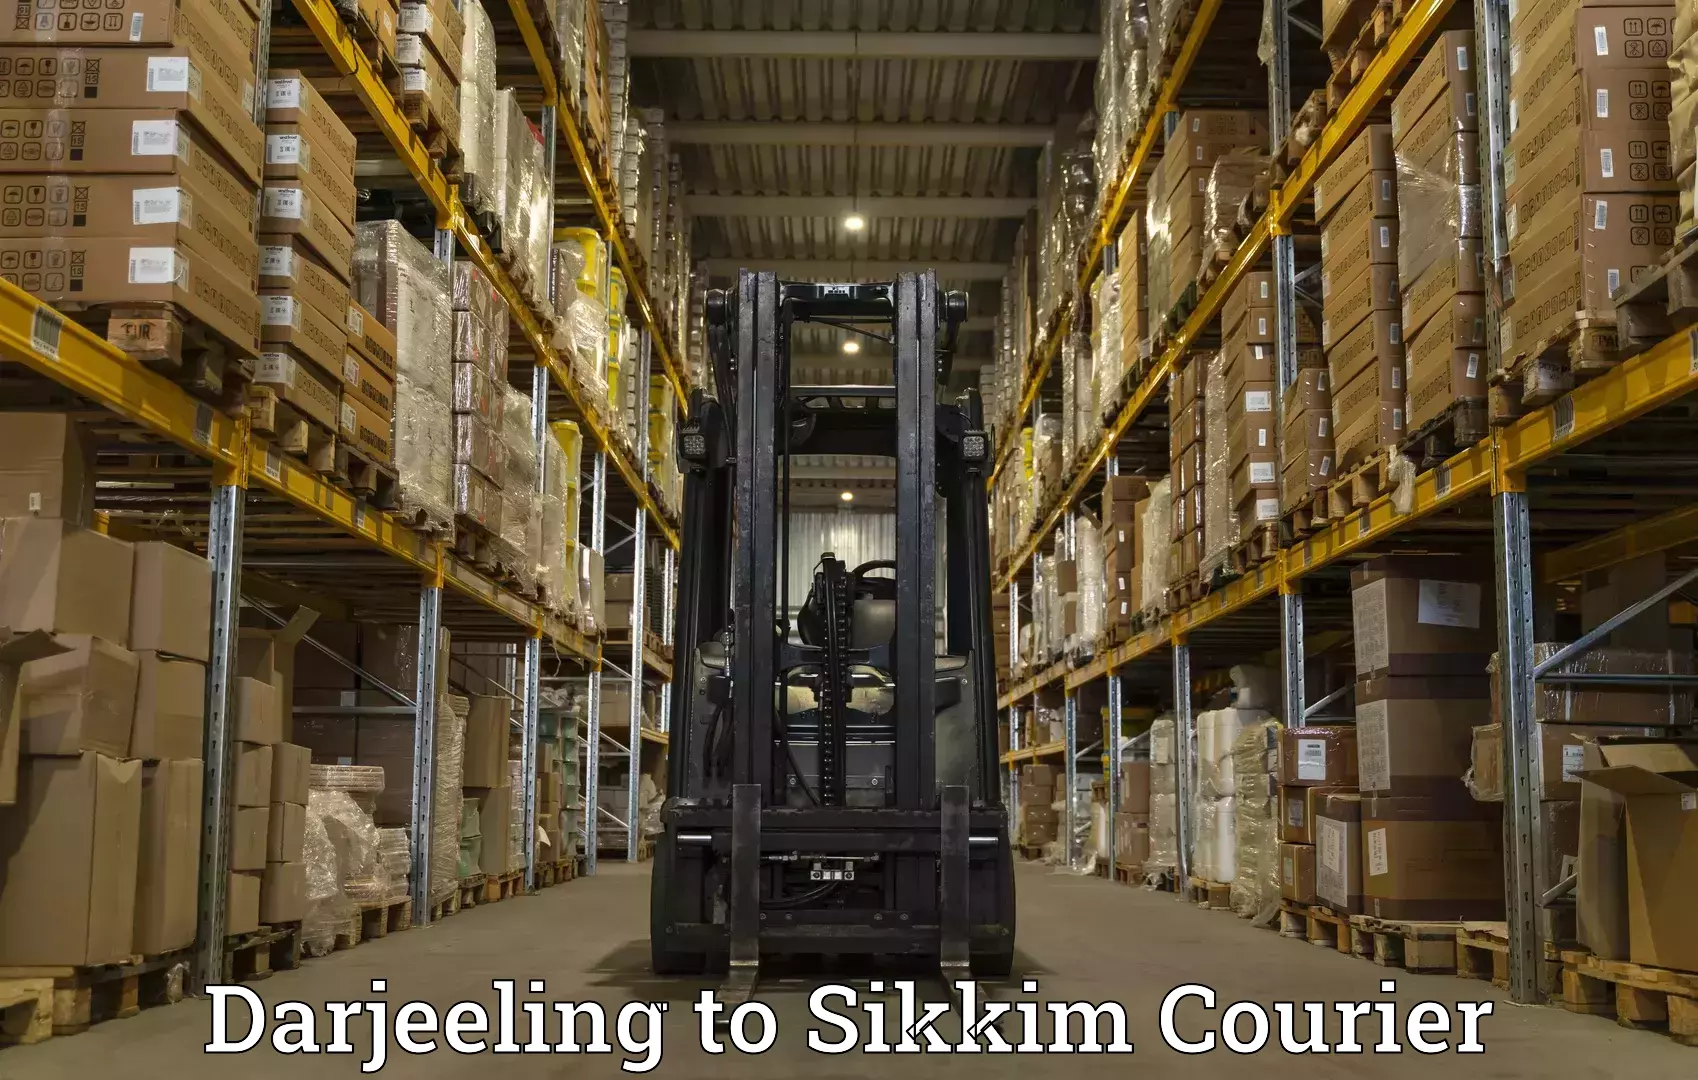 Global freight services Darjeeling to Sikkim